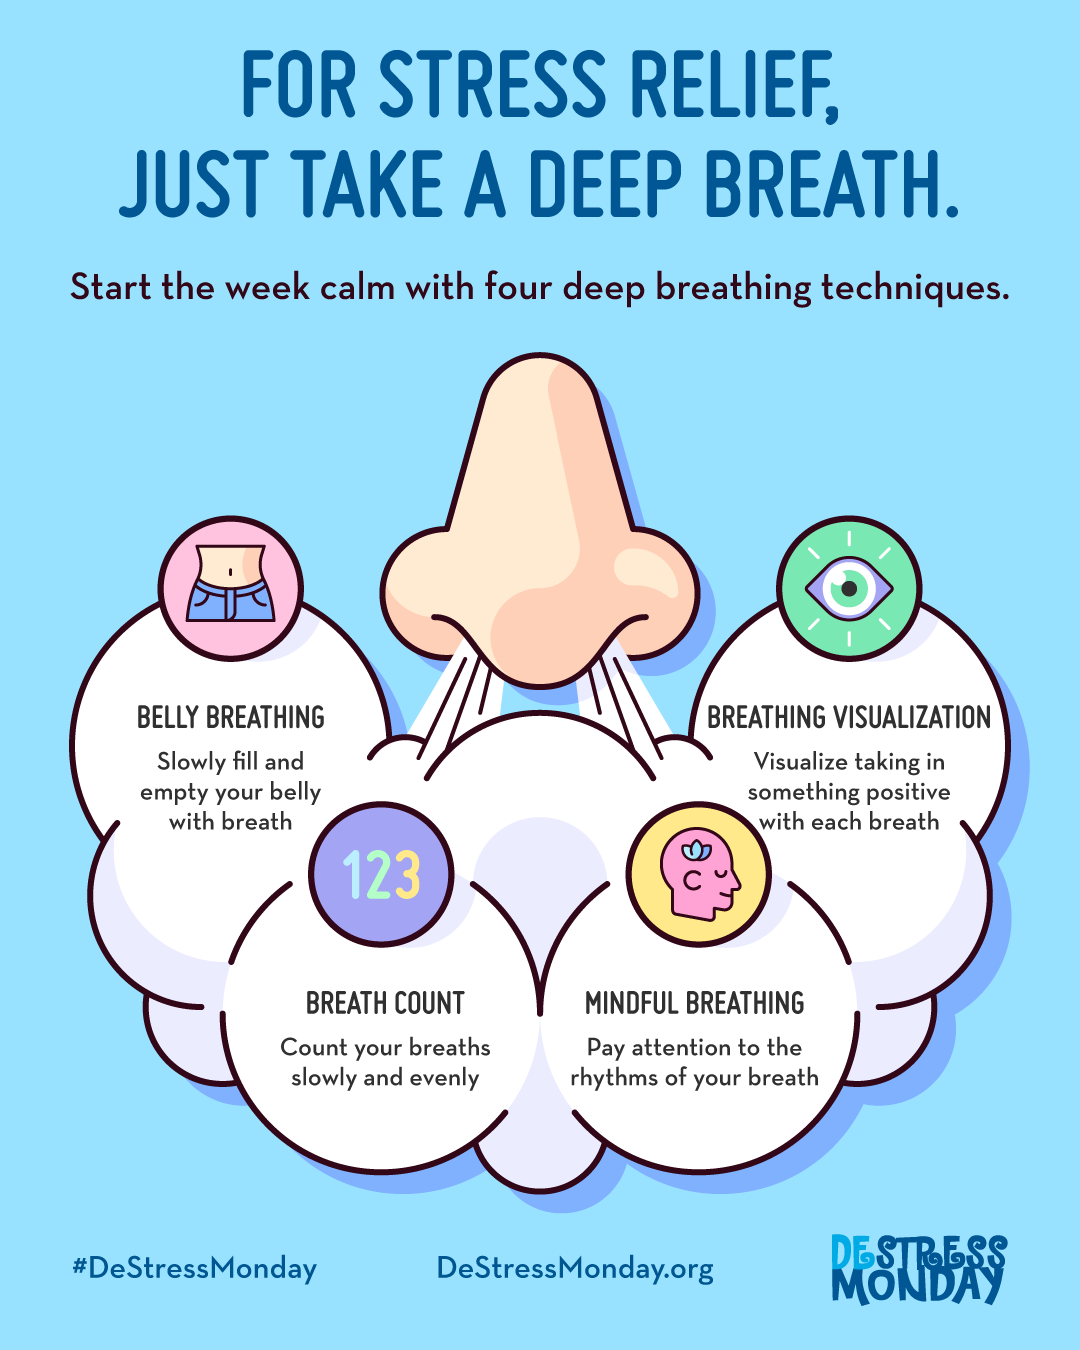 How Does Deep Breathing Contribute To Relaxation?